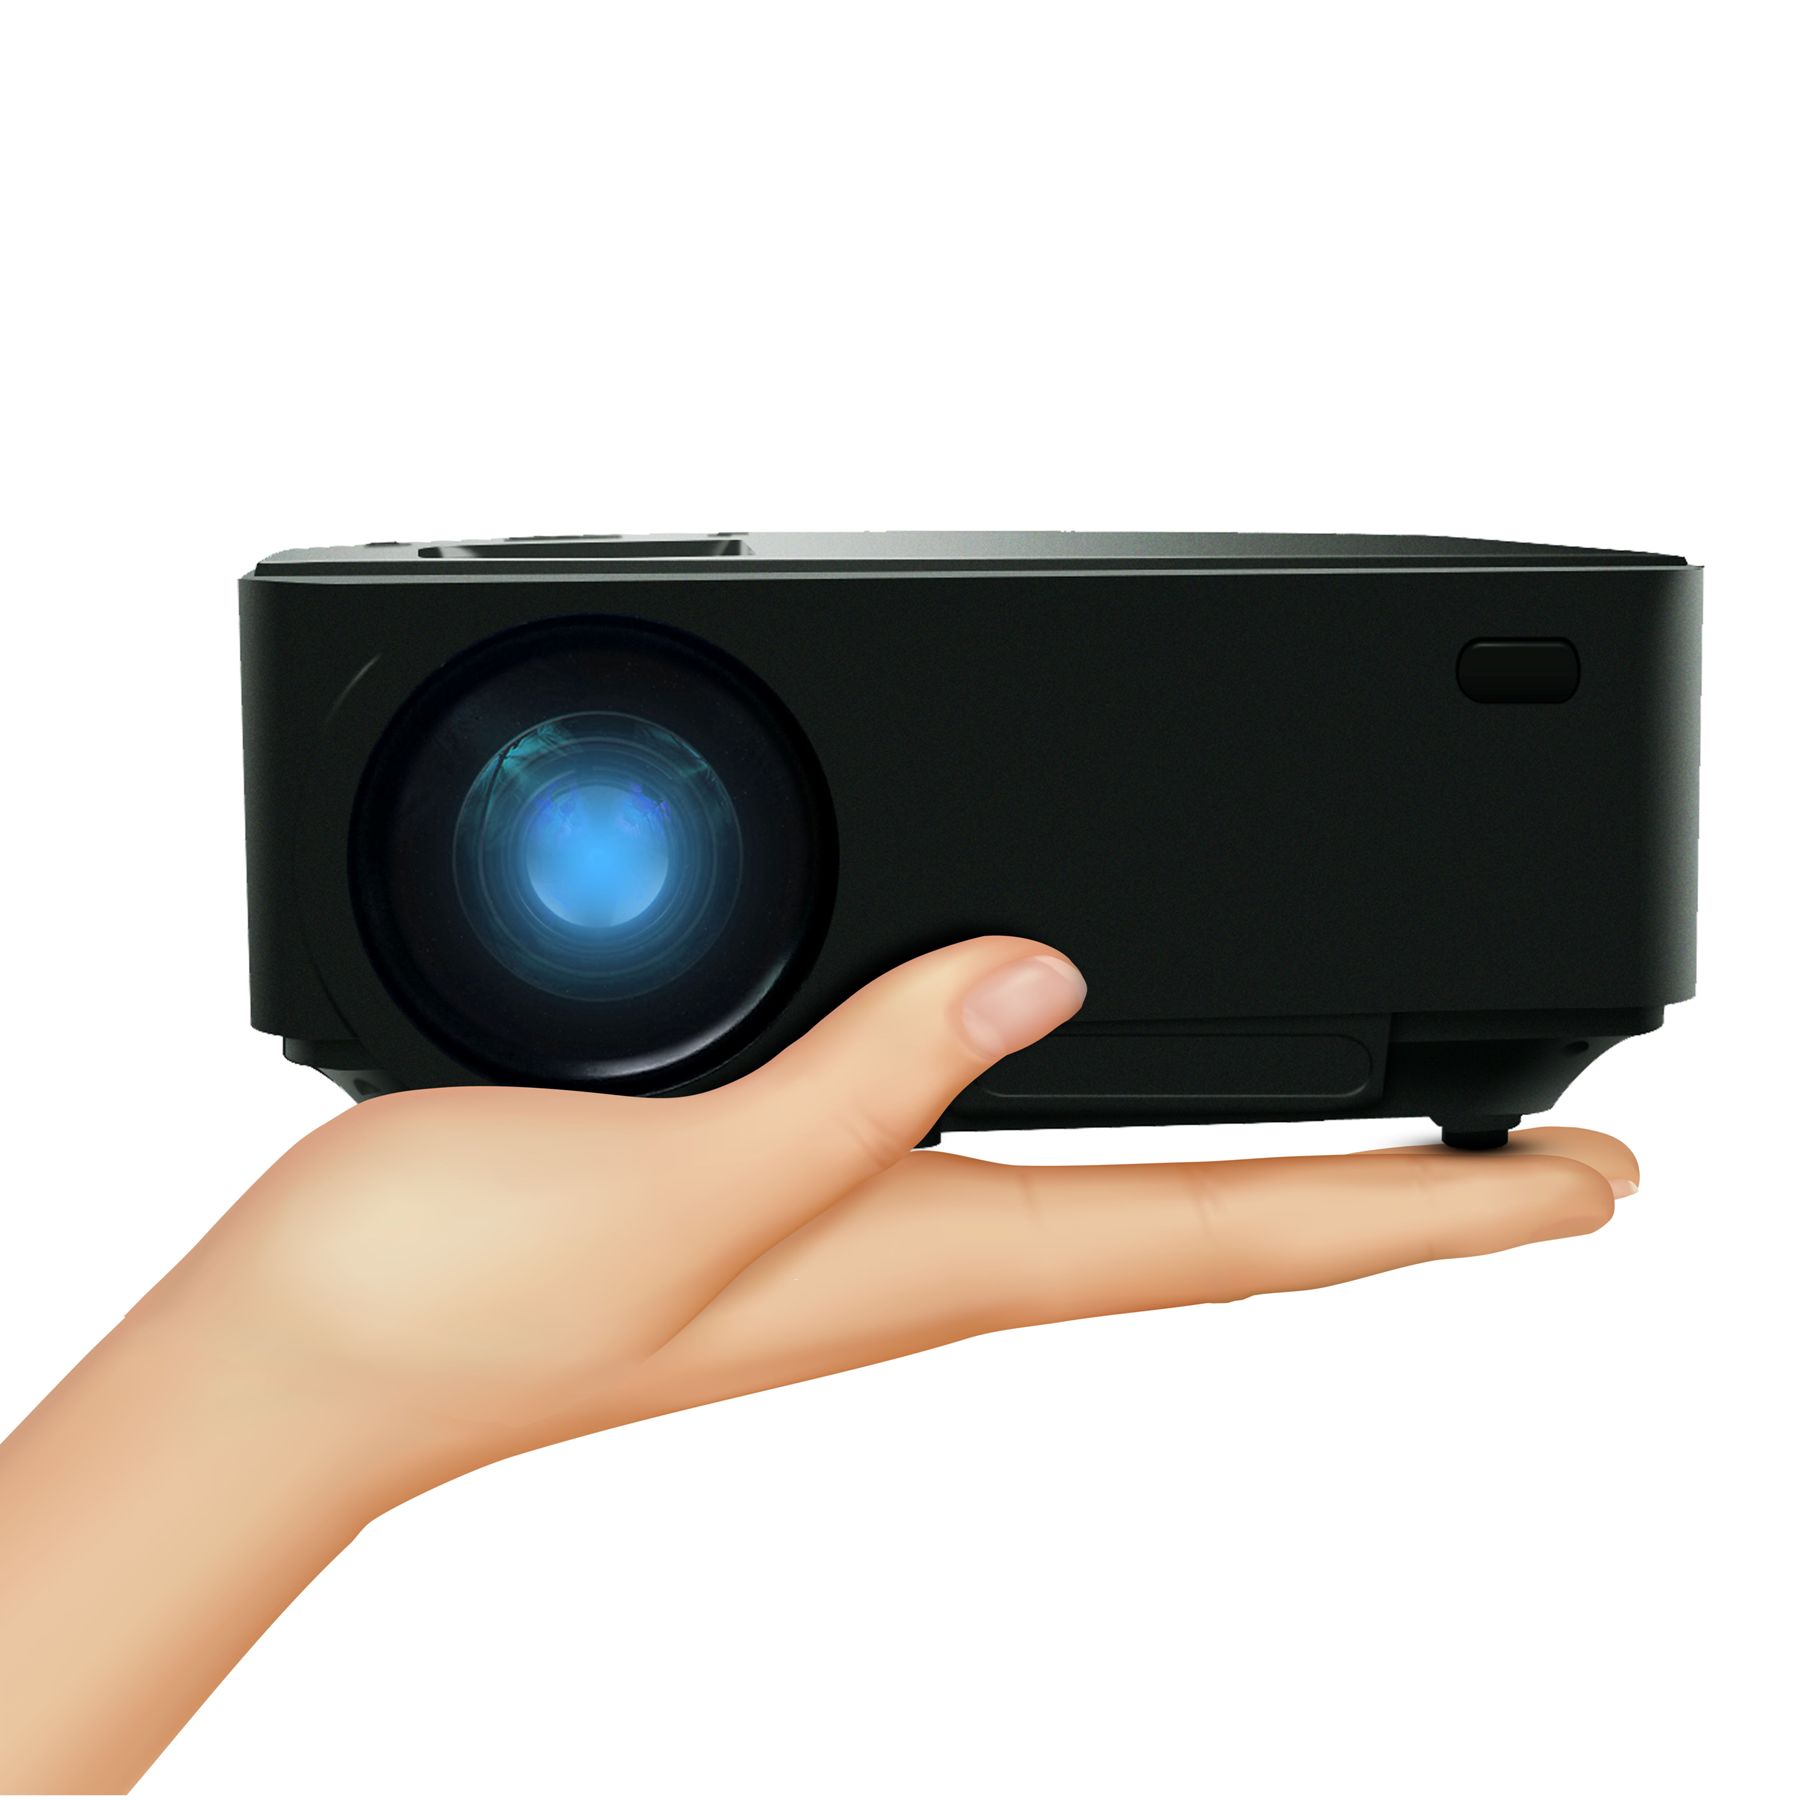 You are currently viewing Portronics Beams High with “BEEM 100” – A Smart & Multifunctional Portable Multimedia Projector